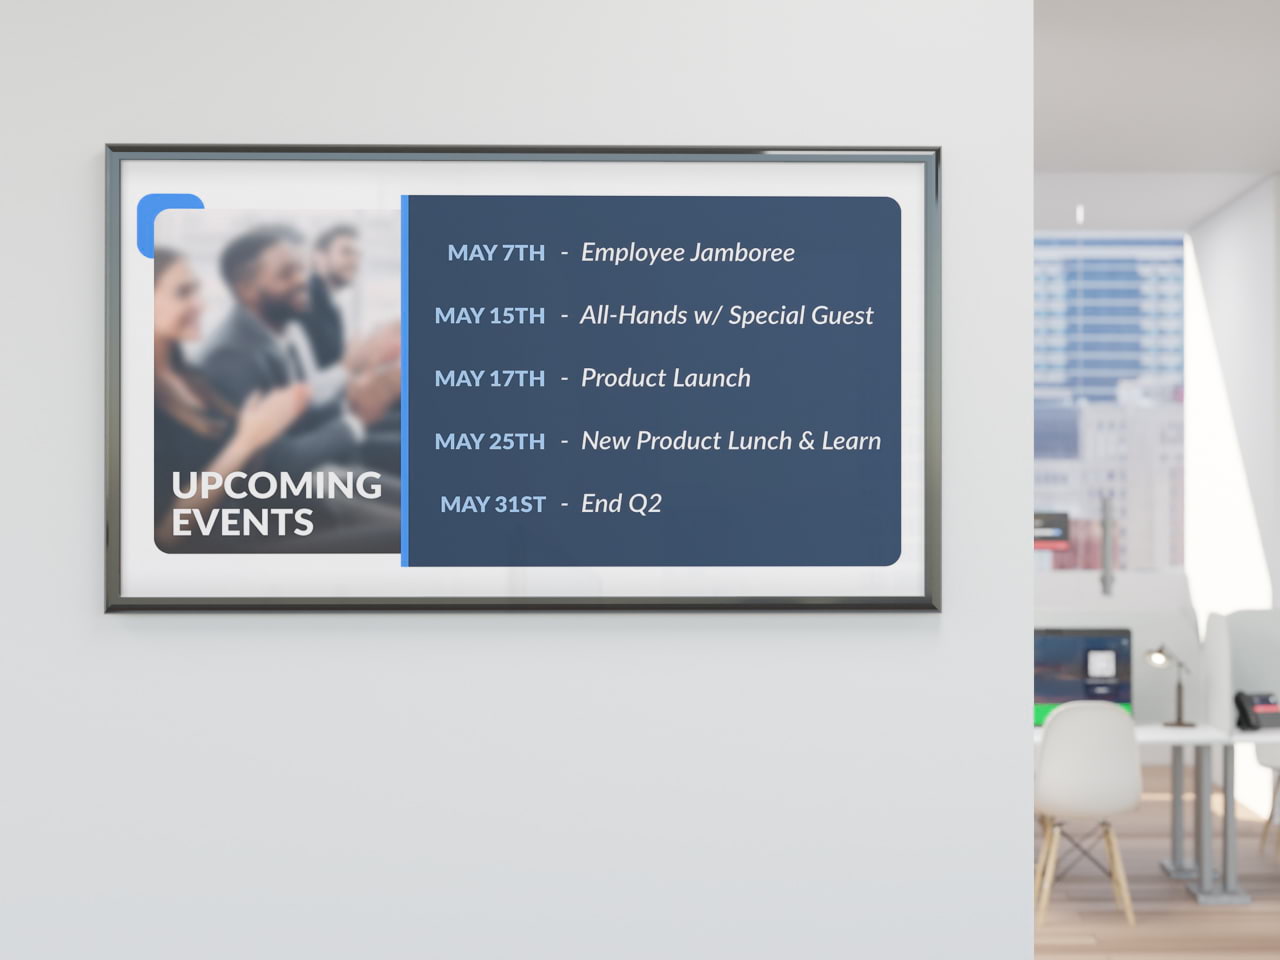 Use Digital Signage to share images, videos, and URLs